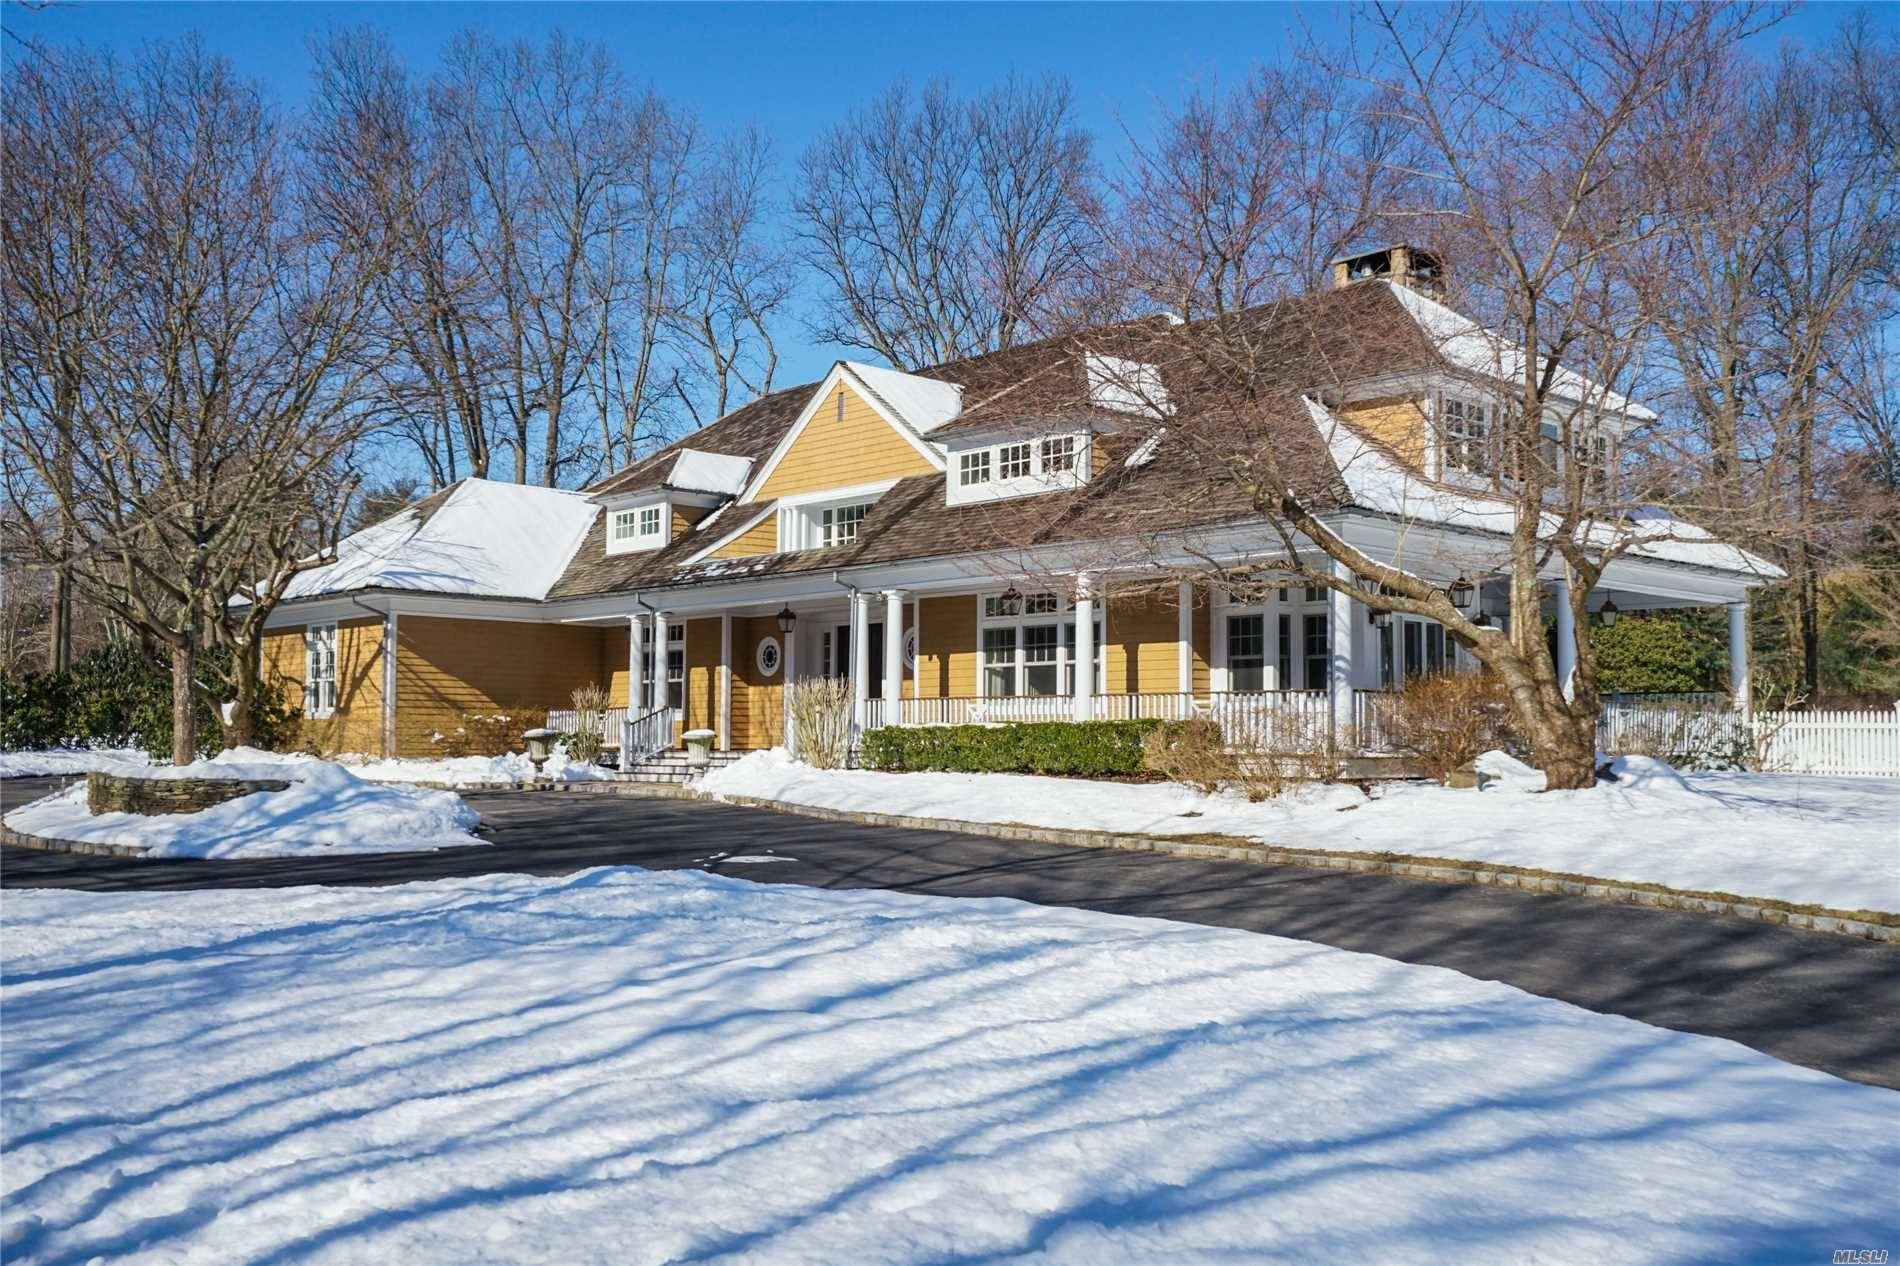 Hampton Home And Lifestyle 1 Hour From Nyc In Aspirational Beach Community On 2 Flat Professionally Landscaped Acres With Heated Pool, Spa, Poolhouse, Lighted Tennis Court.